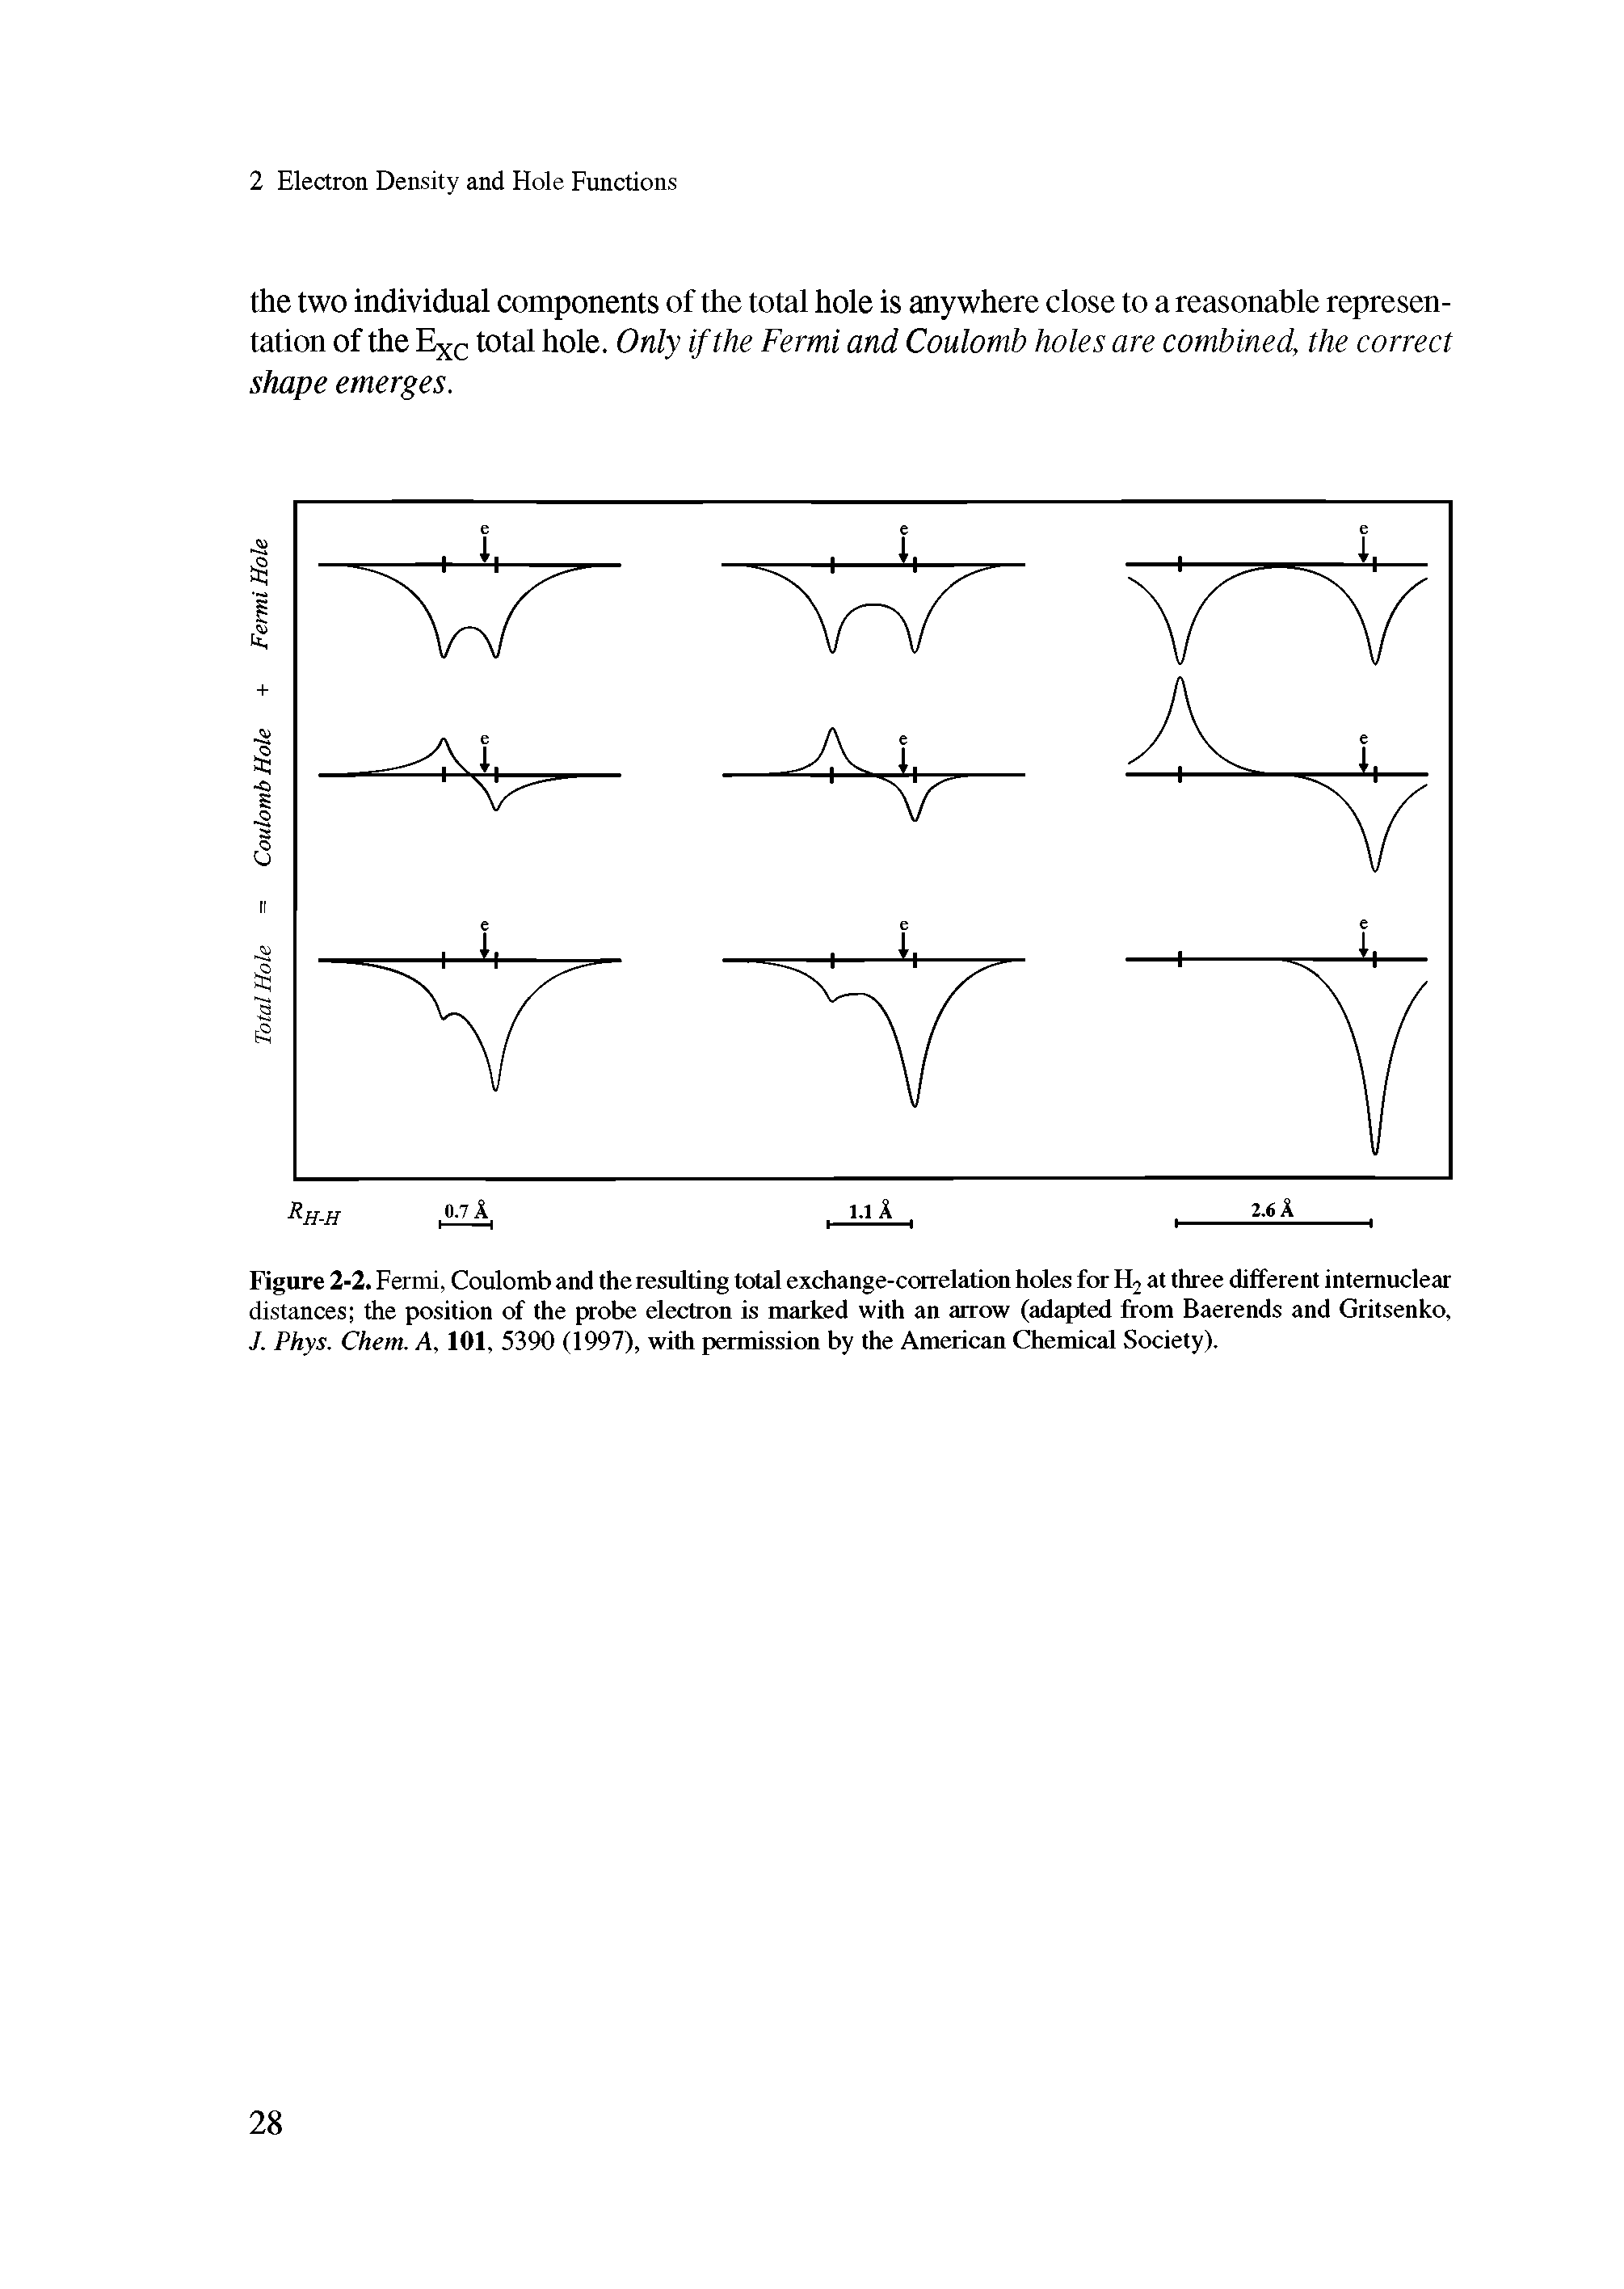 Figure 2-2. Fermi, Coulomb and the resulting total exchange-correlation holes for H2 at three different intemuclear distances the position of the probe electron is marked with an arrow (adapted from Baerends and Gritsenko, J. Phys. Chem. A, 101, 5390 (1997), with permission by the American Chemical Society).